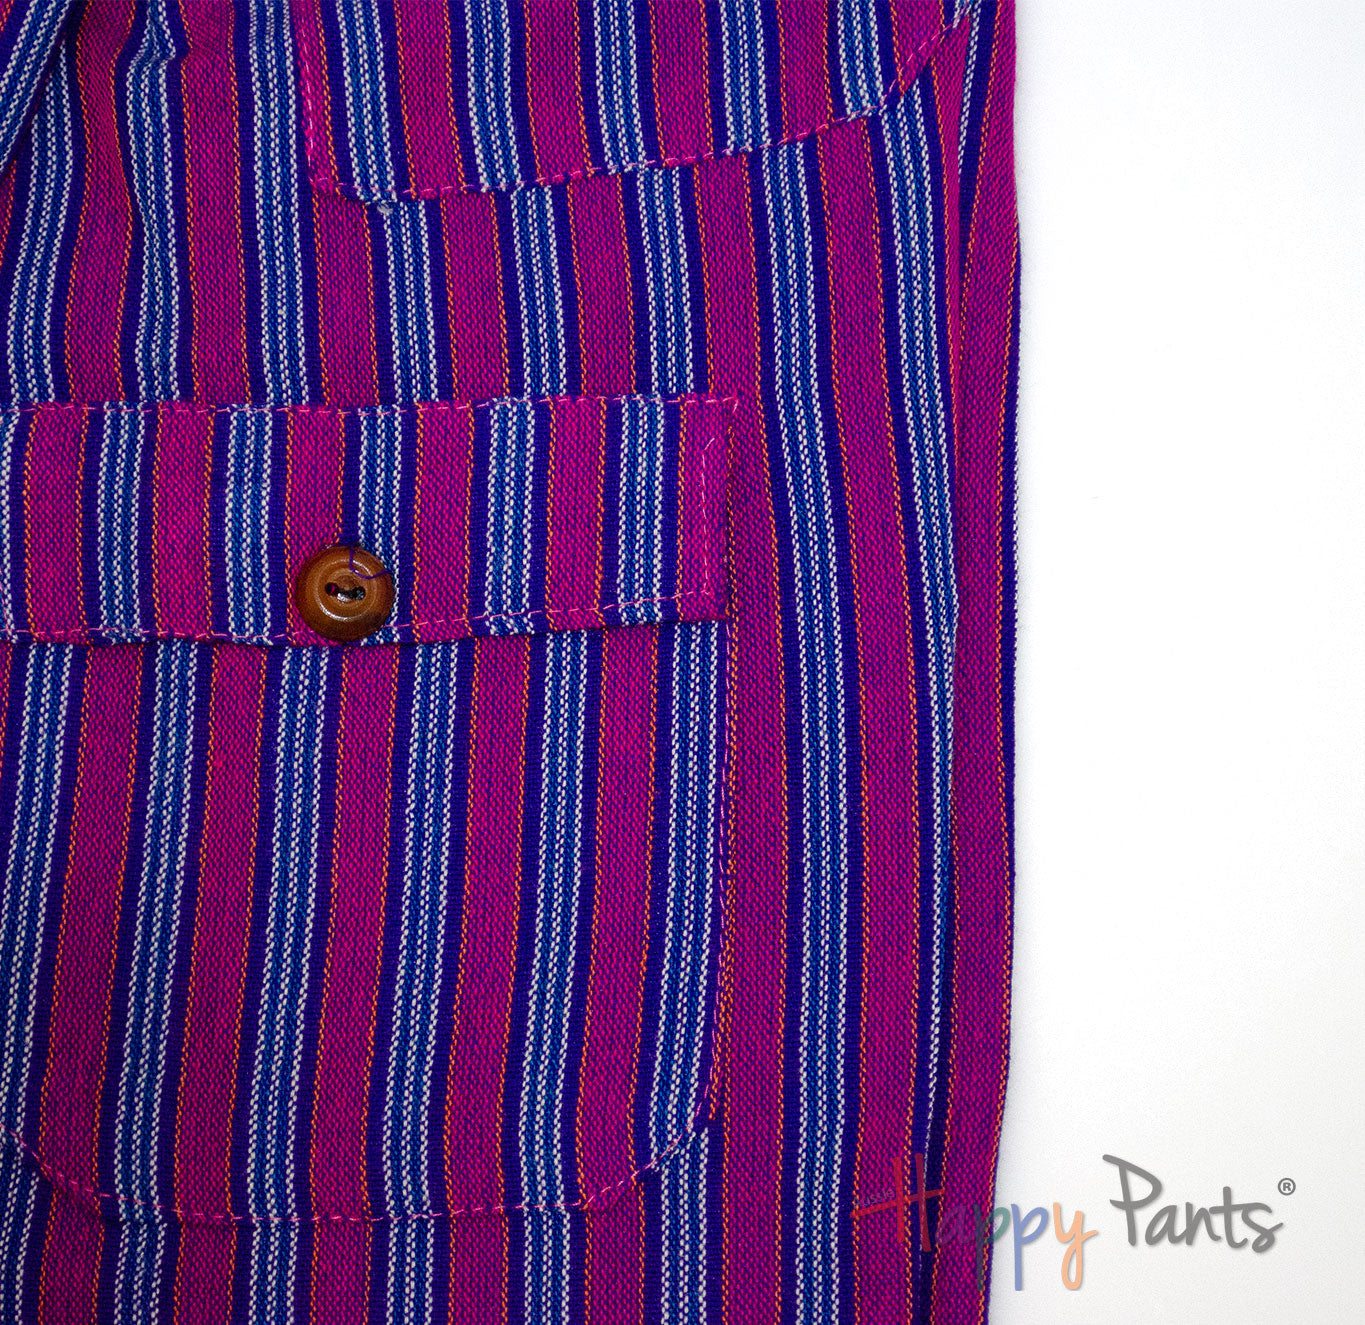 Purple Stripy Happy-Pants - Youth Collection